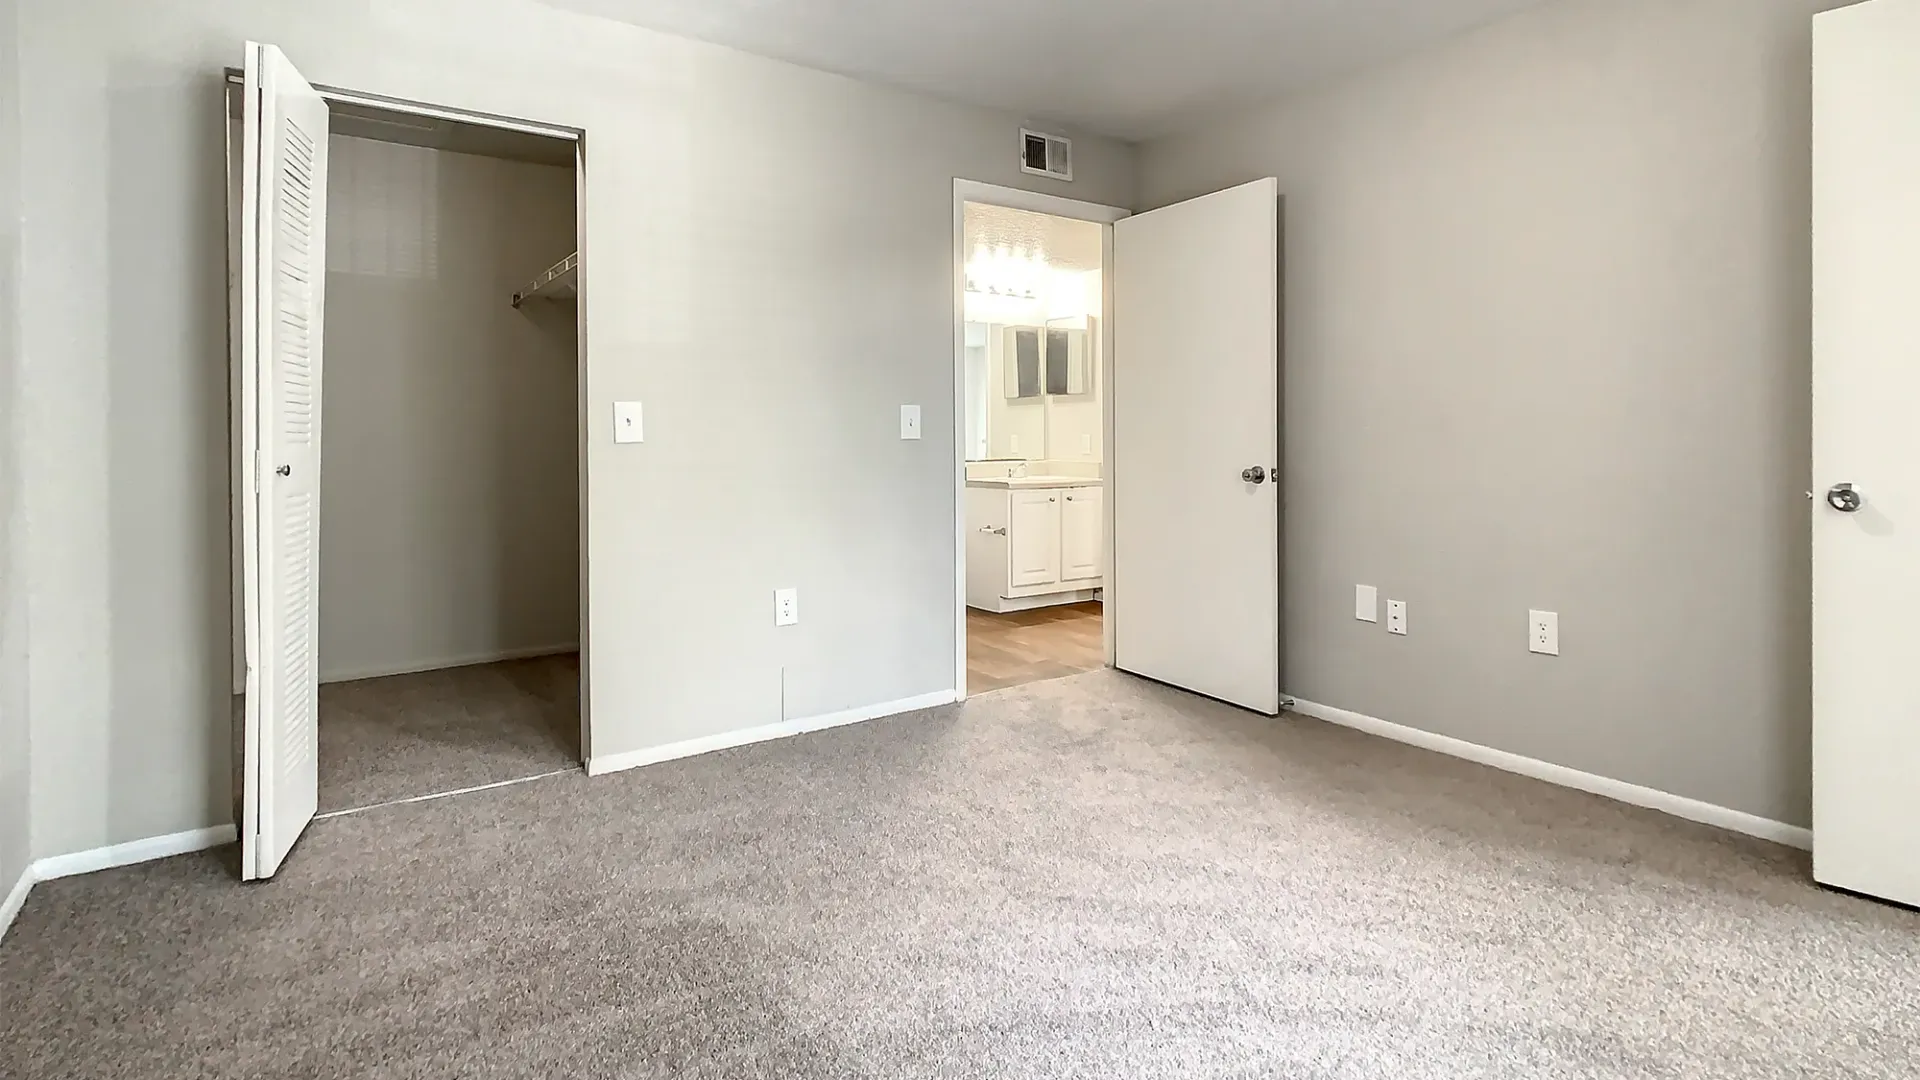 A bedroom with plush carpeting and large closet